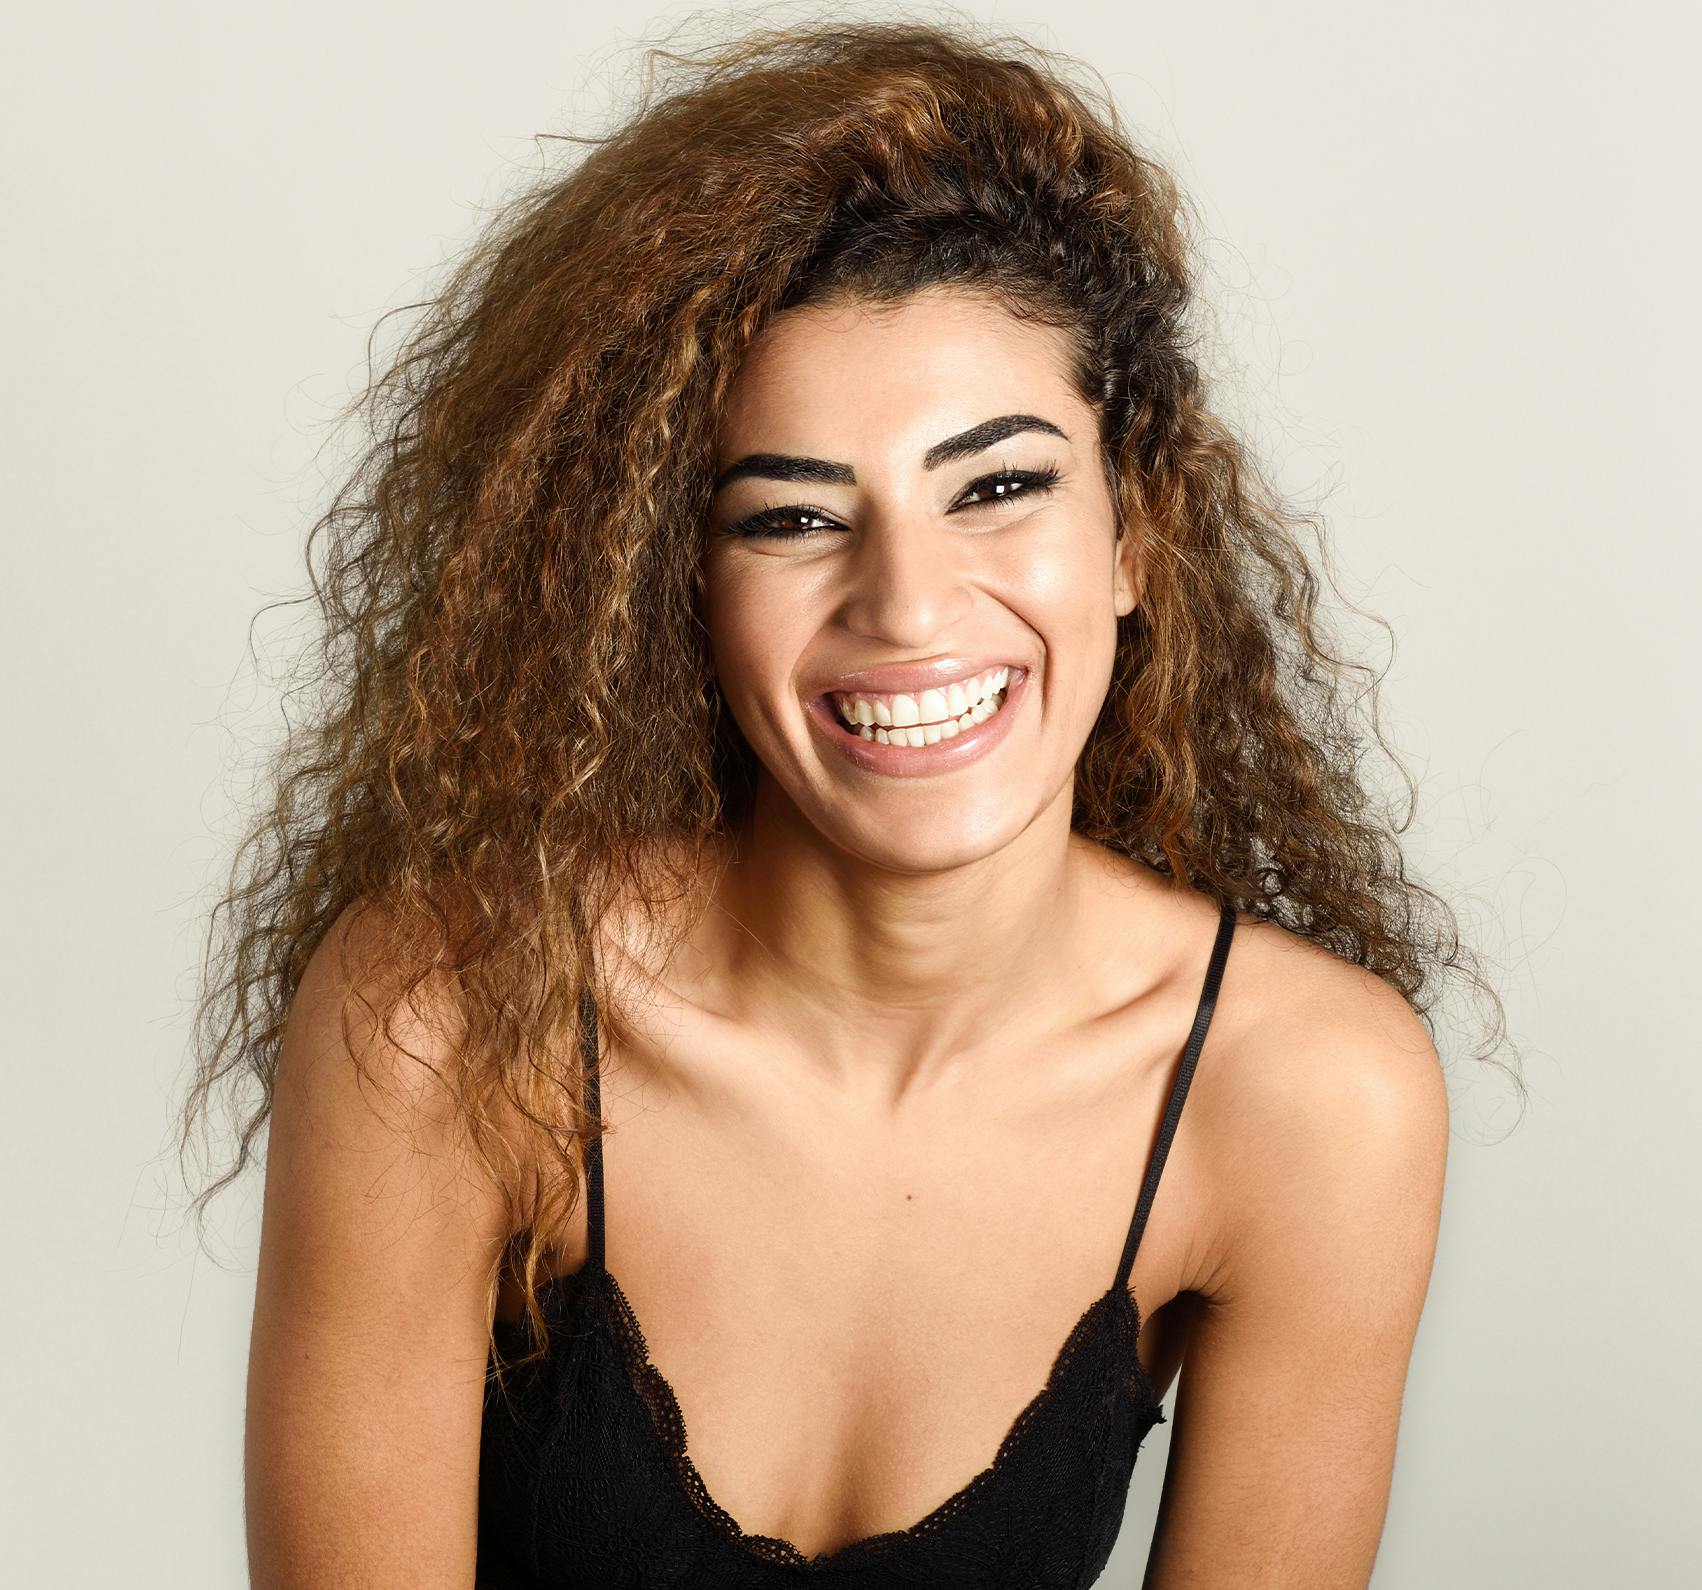 Frizzy haired woman in a black top smiling towards the camera.